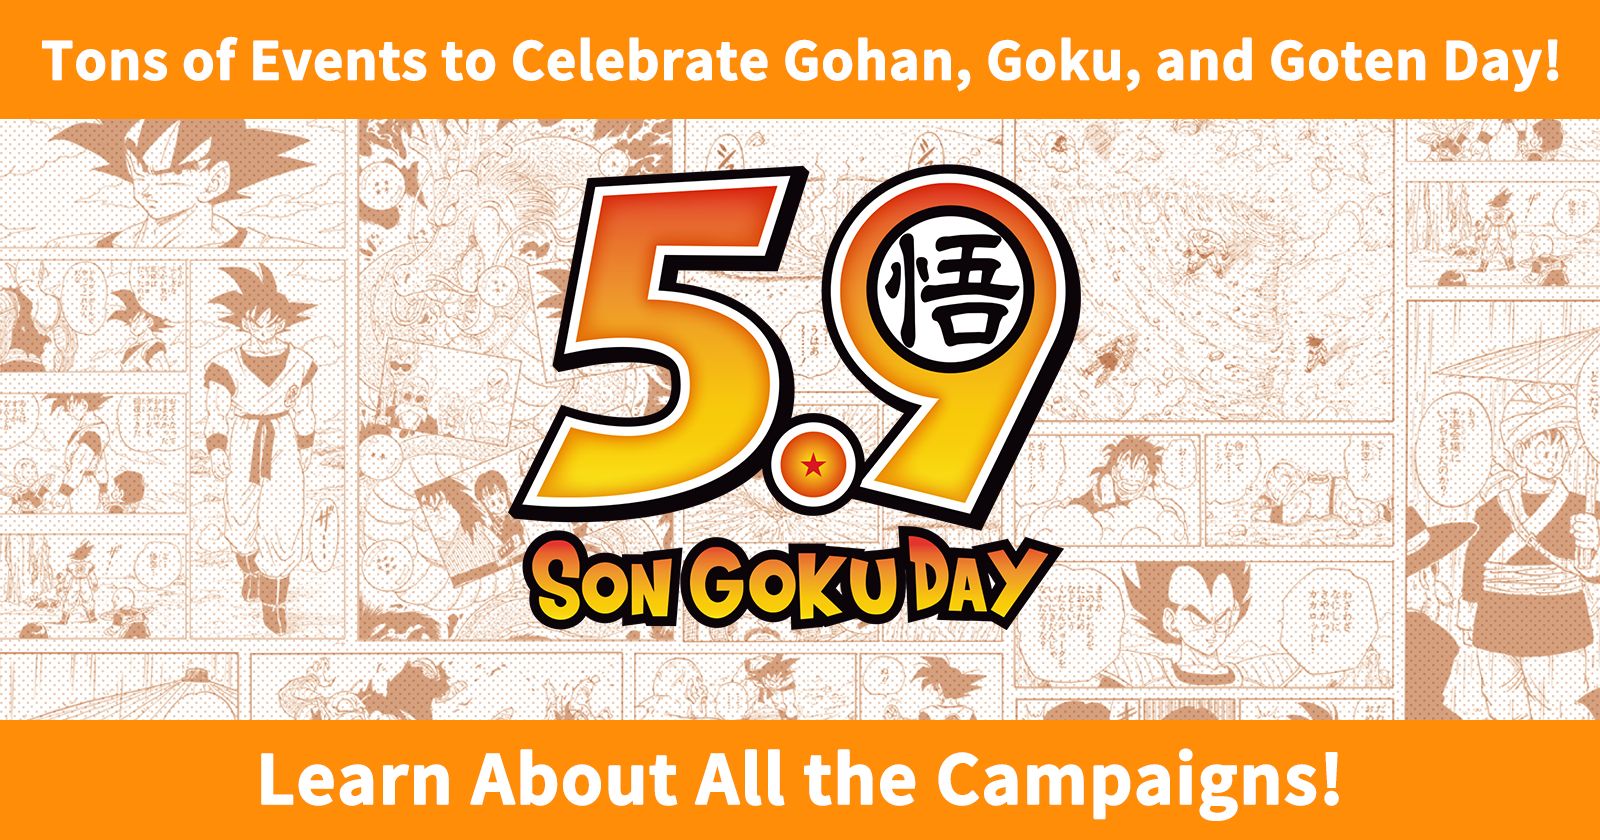 Gohan/Goku/Goten Day Campaign Info! Read On to Learn What's Happening This Year!